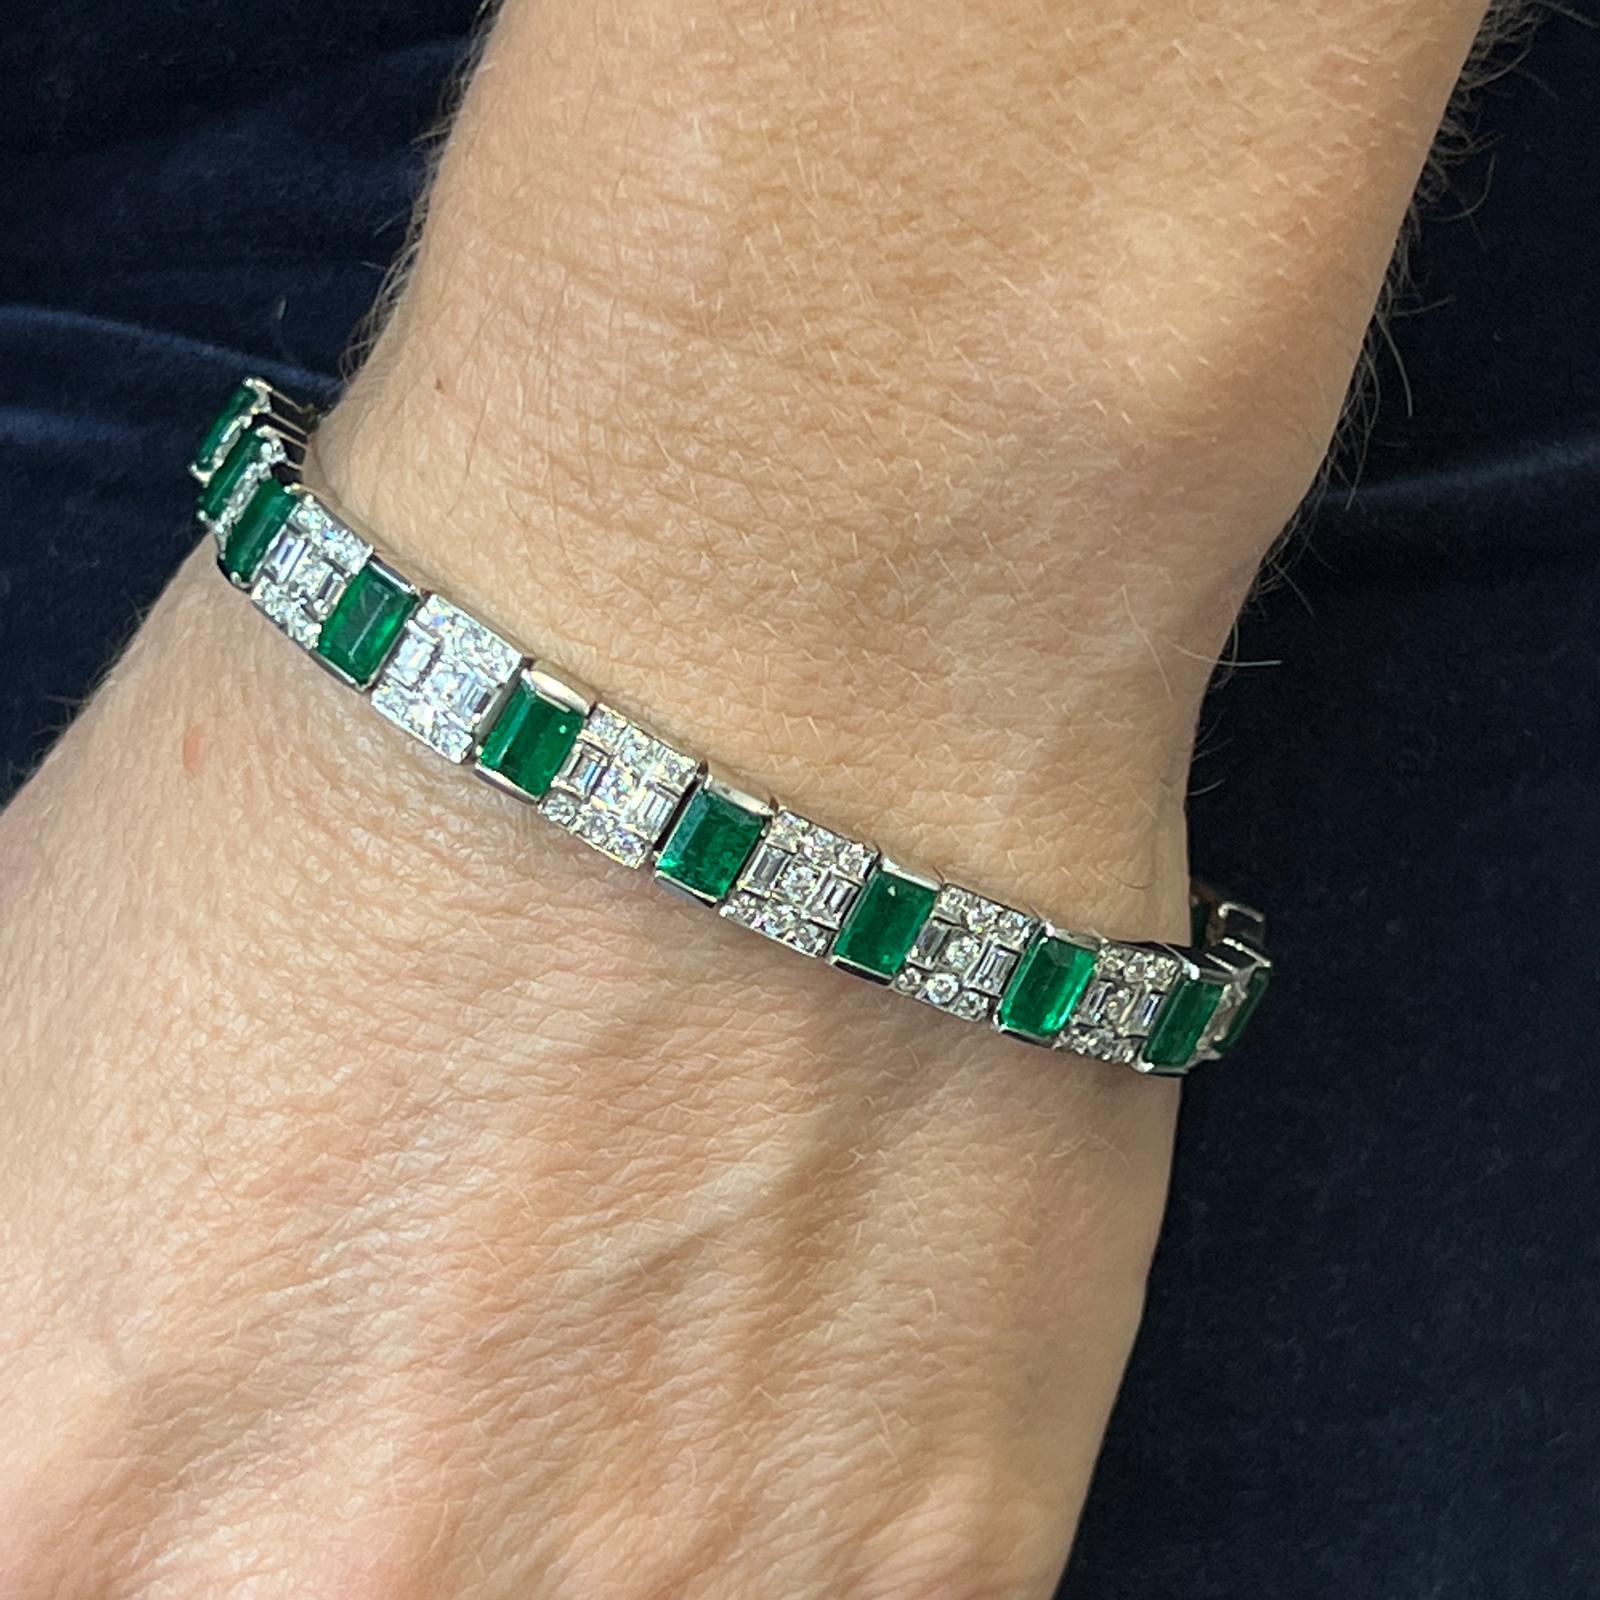 Stunning emerald and diamond bracelet handcrafted in platinum. The bracelet features 17 emerald cut natural rich green emeralds weighing 8.36 carat total weight. The beautifully matched emeralds alternate with round brilliant and baguette cut